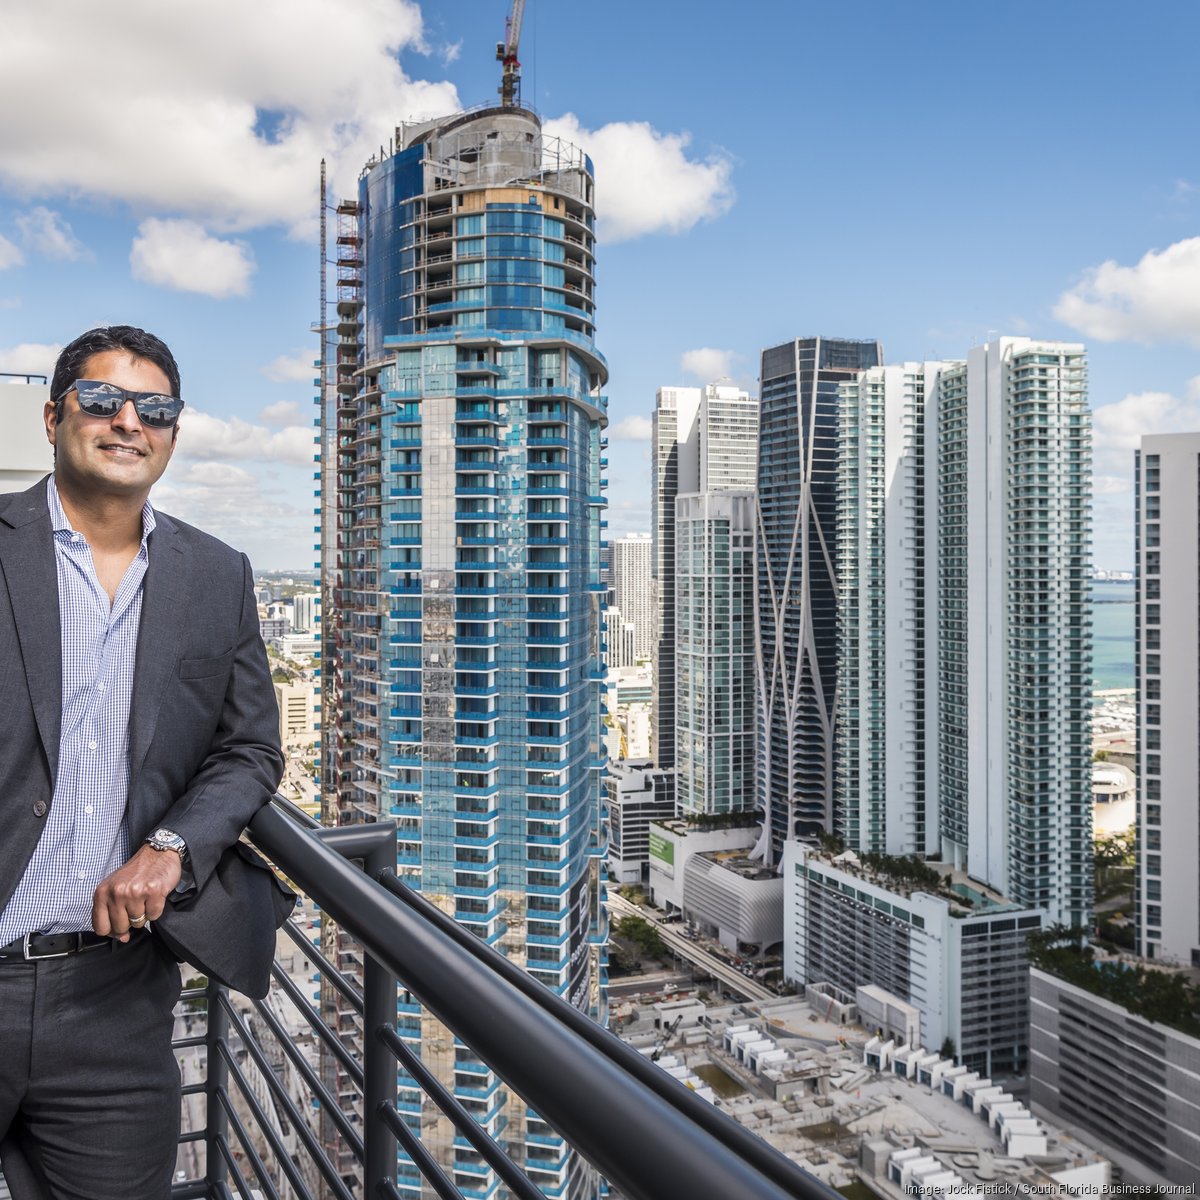 Miami Worldcenter's first building to open is Caoba apartments